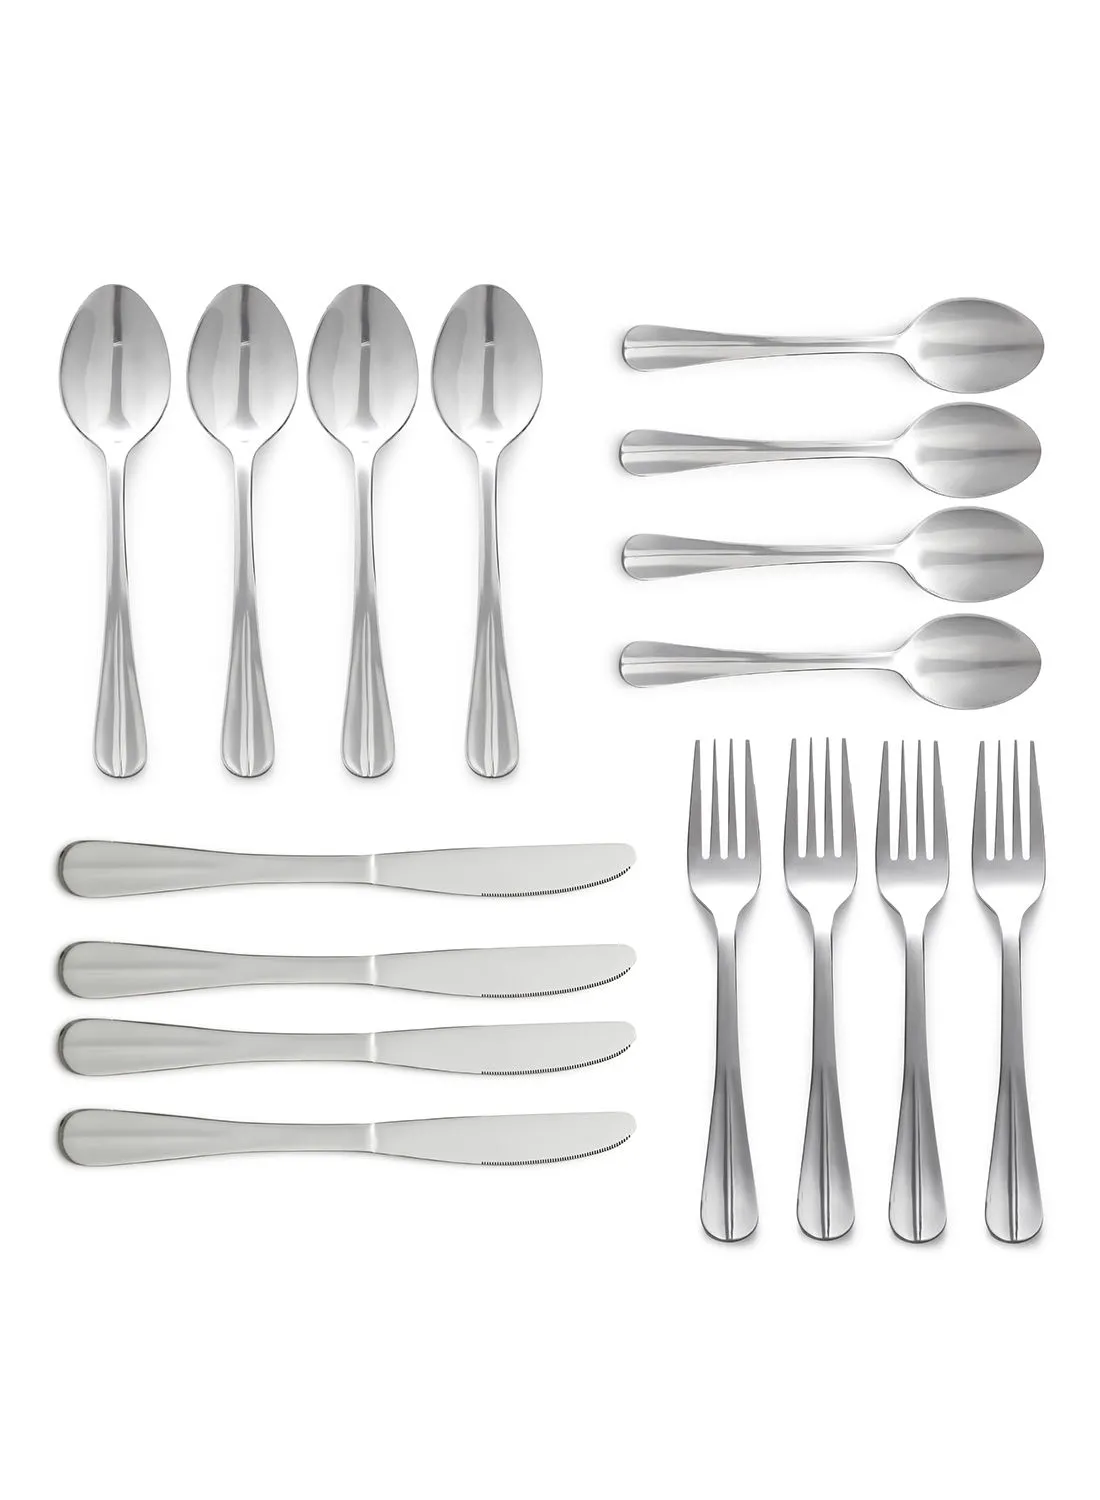 noon east 16 Piece Cutlery Set - Made Of Stainless Steel - Silverware Flatware - Spoons And Forks Set, Spoon Set - Table Spoons, Tea Spoons, Forks, Knives - Serves 4 - Design Silver Flowrish